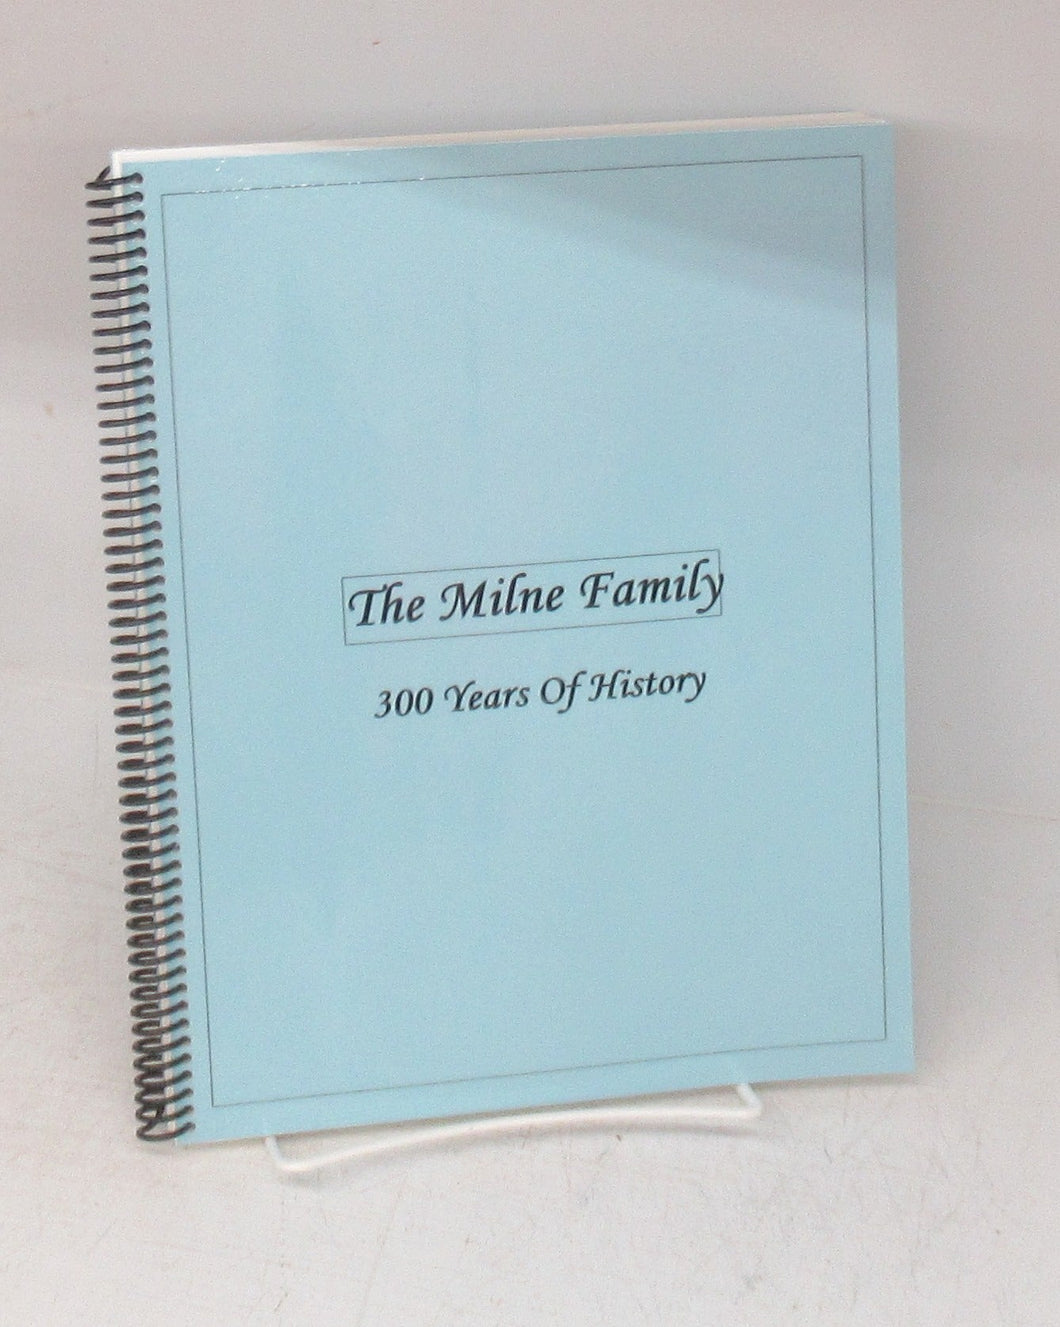 The Milne Family: 300 Years of Ancestral History